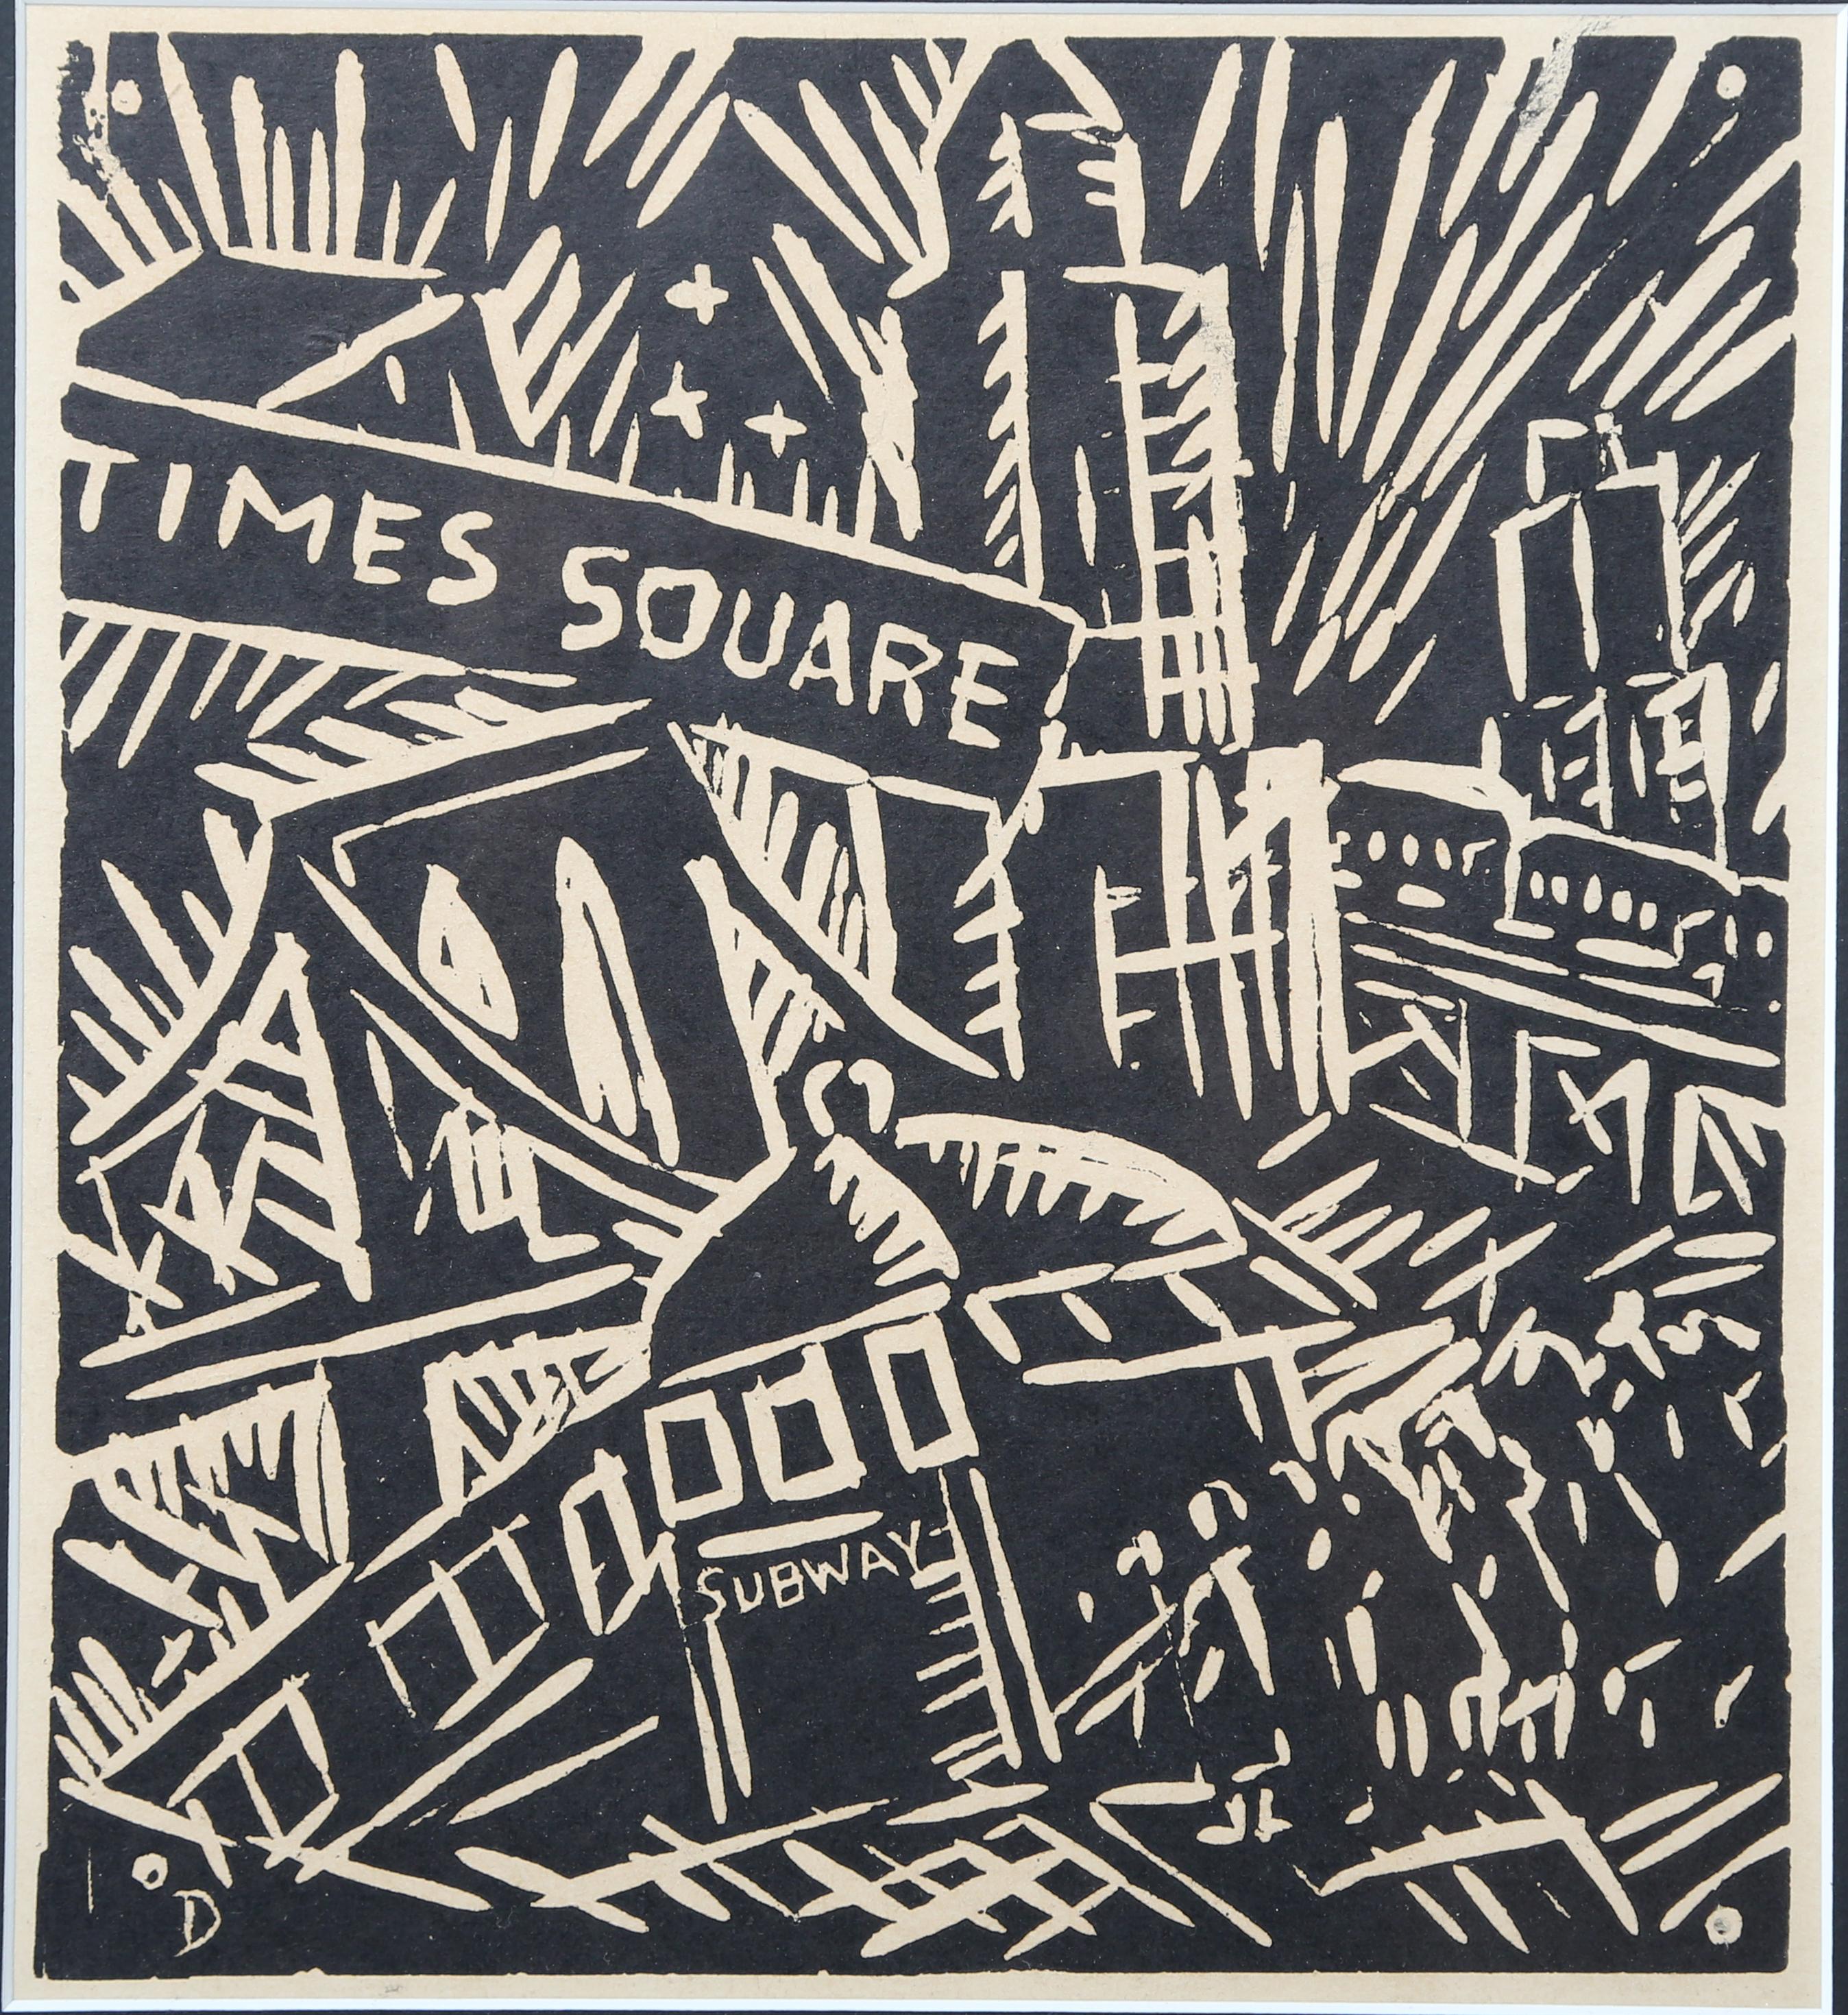 A Linoleum cut image depicting the Jazz age in Times Square.
Hidden beneath the mat in block letters XMAS 1926/MARY AND DONALD DESKEY.(see photo)
Similar graphics were used on matchboxes circa 1926-1927.,pictured in Donald Deskey Book by David